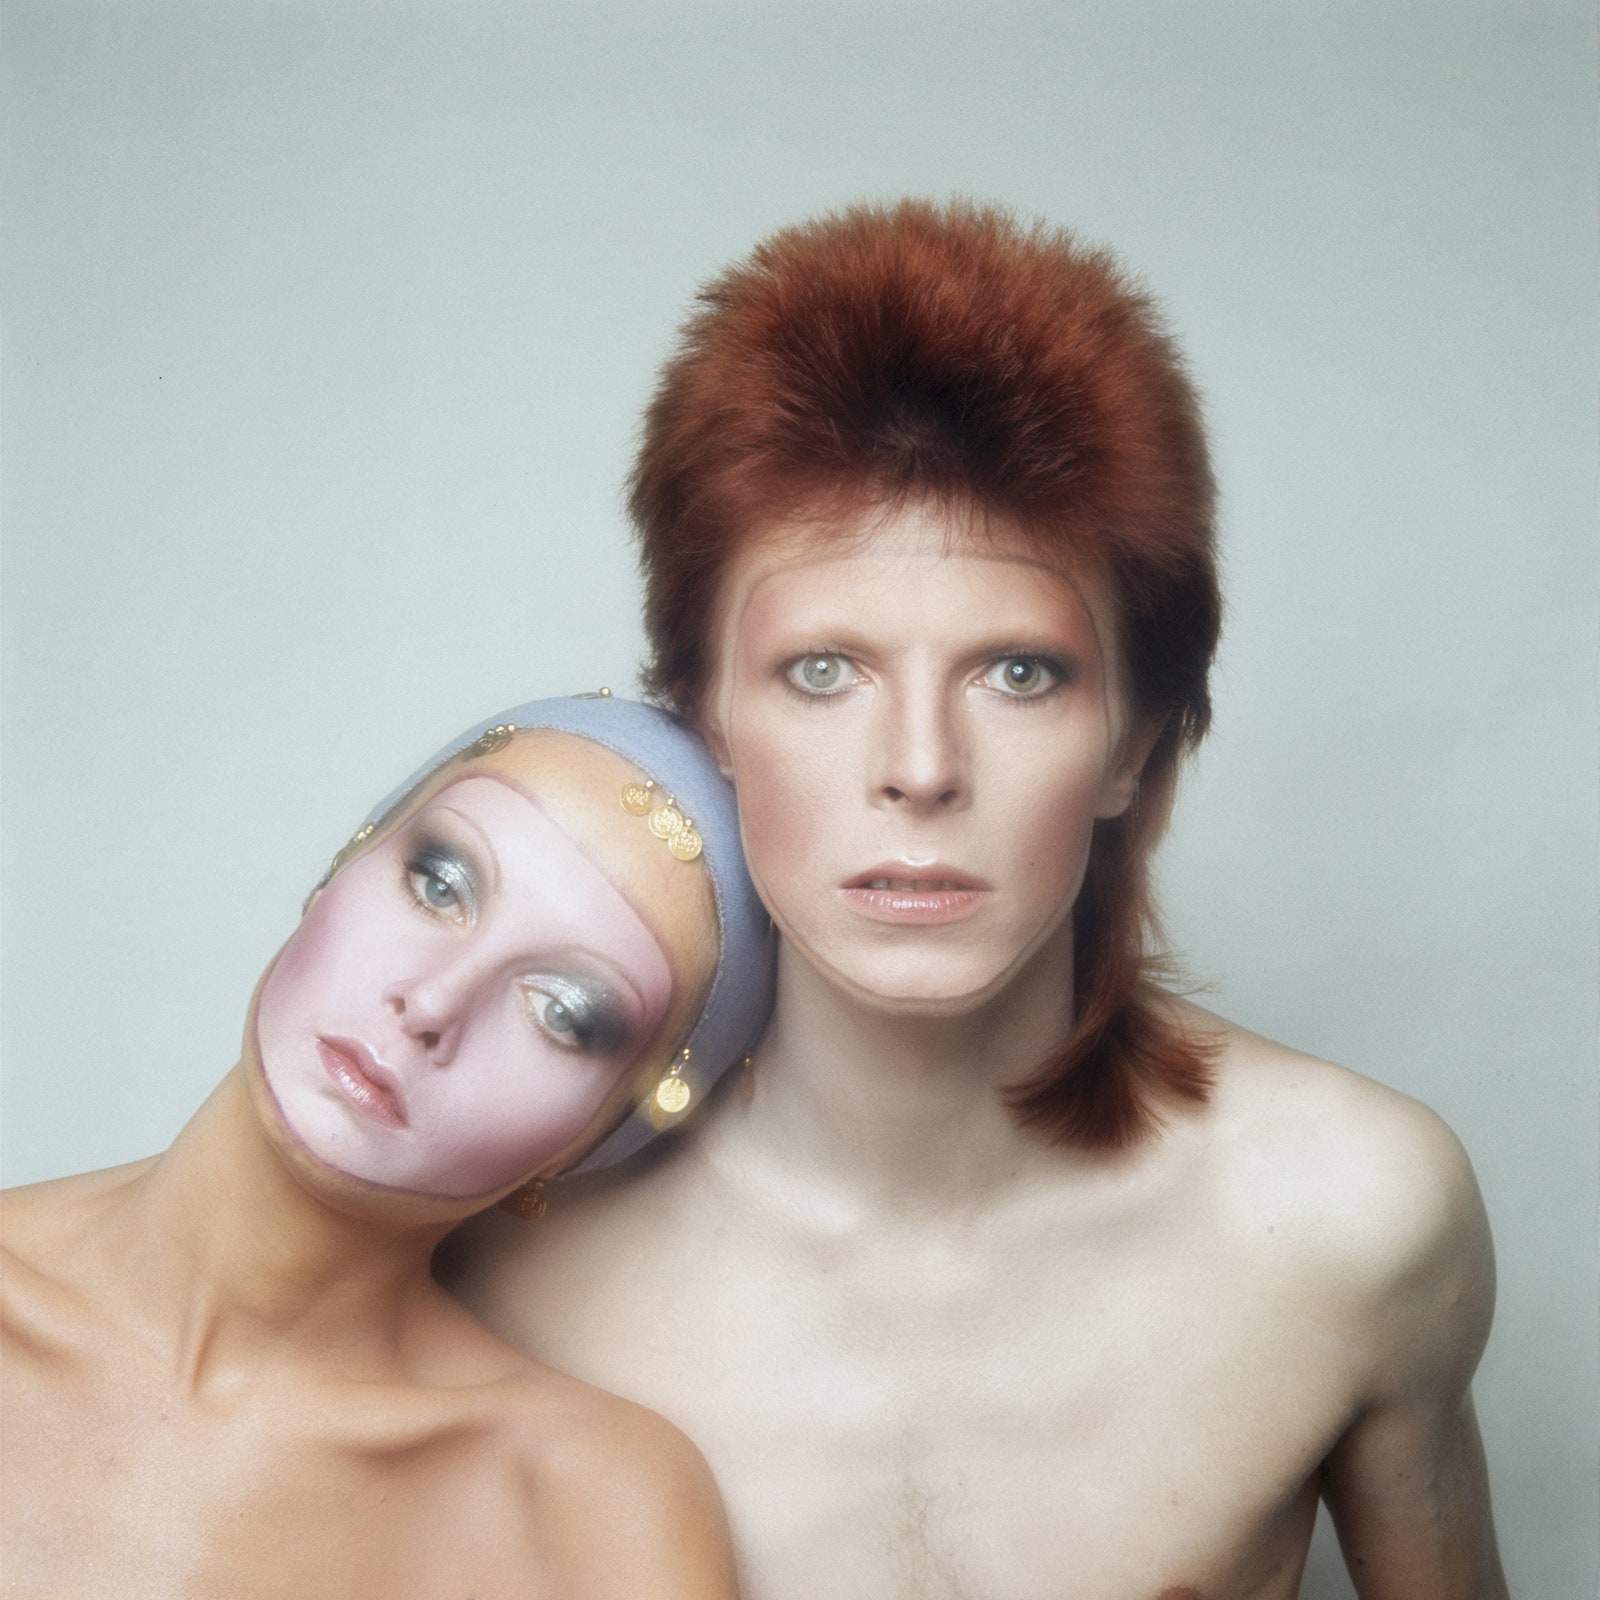 English model Twiggy poses with David Bowie in Paris for the cover of his 'Pin Ups' album 1973.